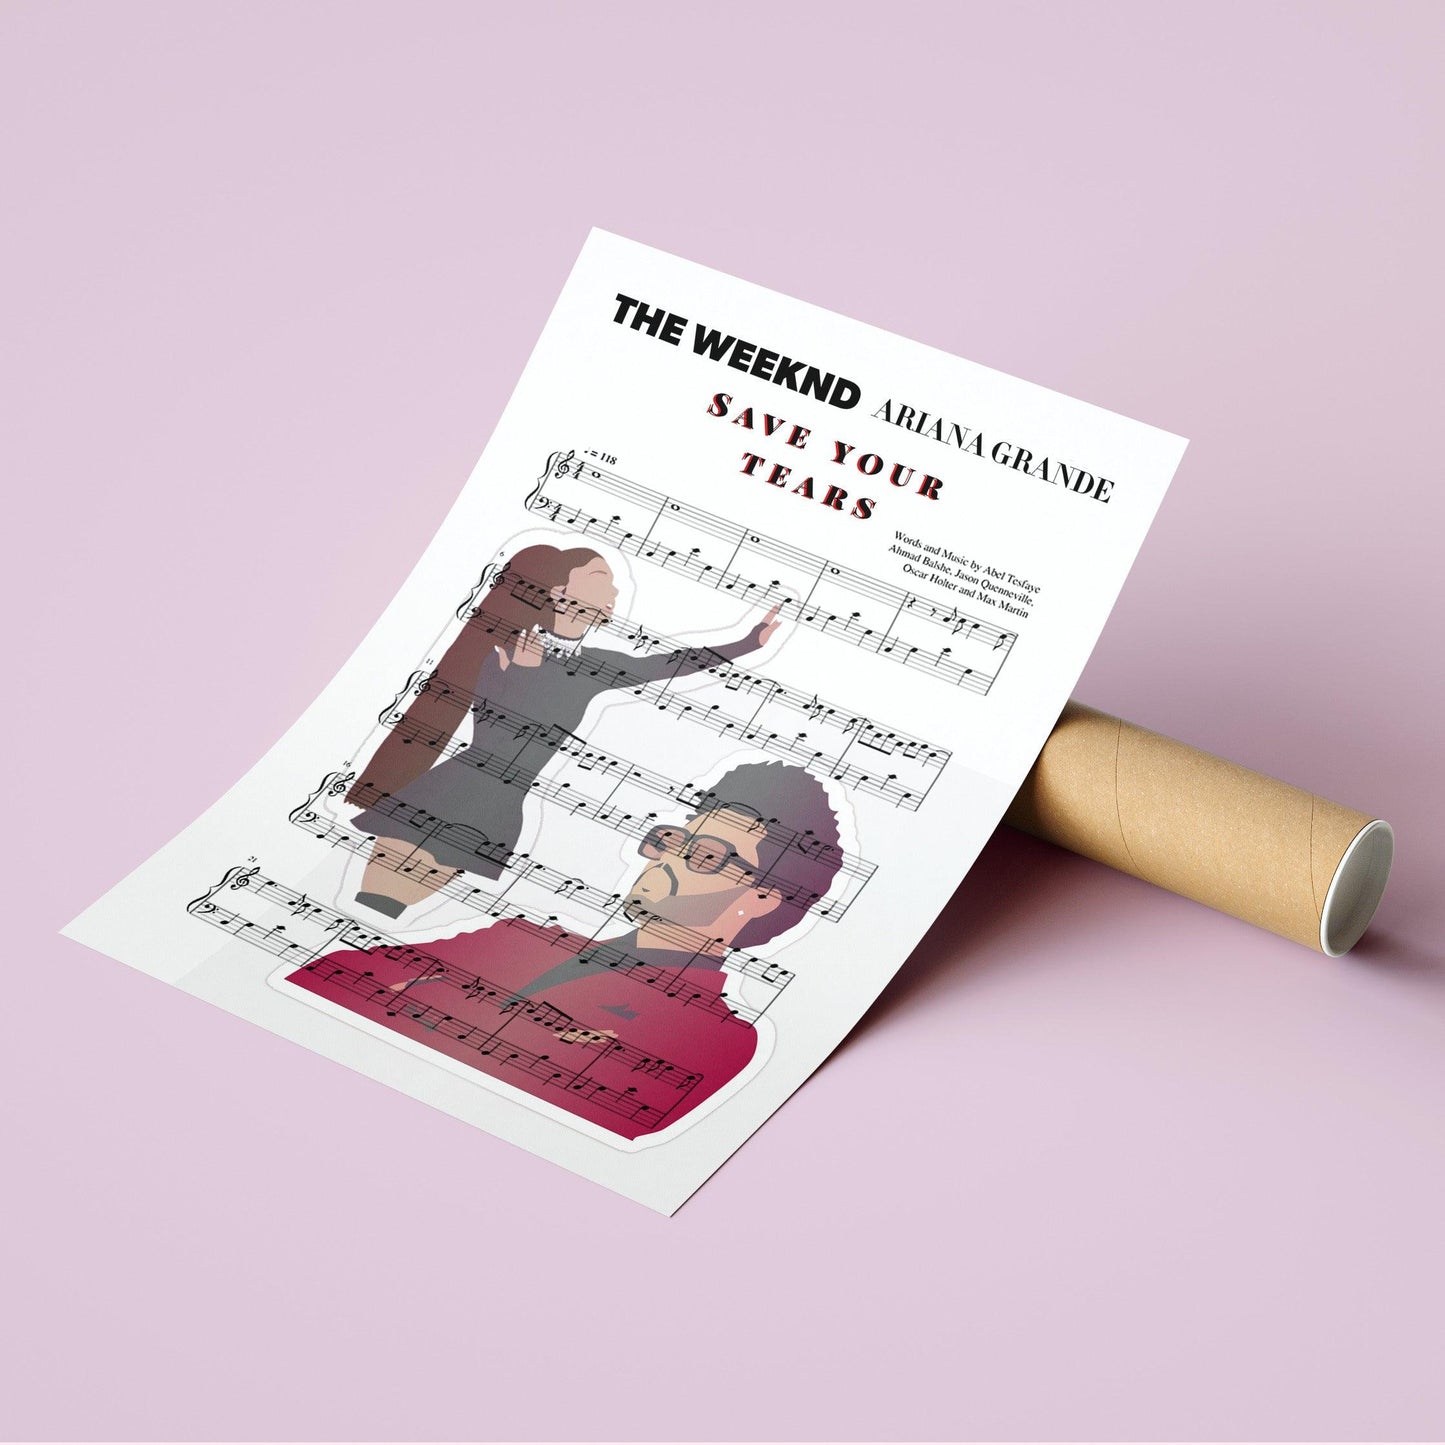 The Weeknd - Save Your Tears Song Music Print | Song Music Sheet Notes Print  Everyone has a favorite song and now you can show the score as printed staff. The personal favorite song sheet print shows the song chosen as the score. 